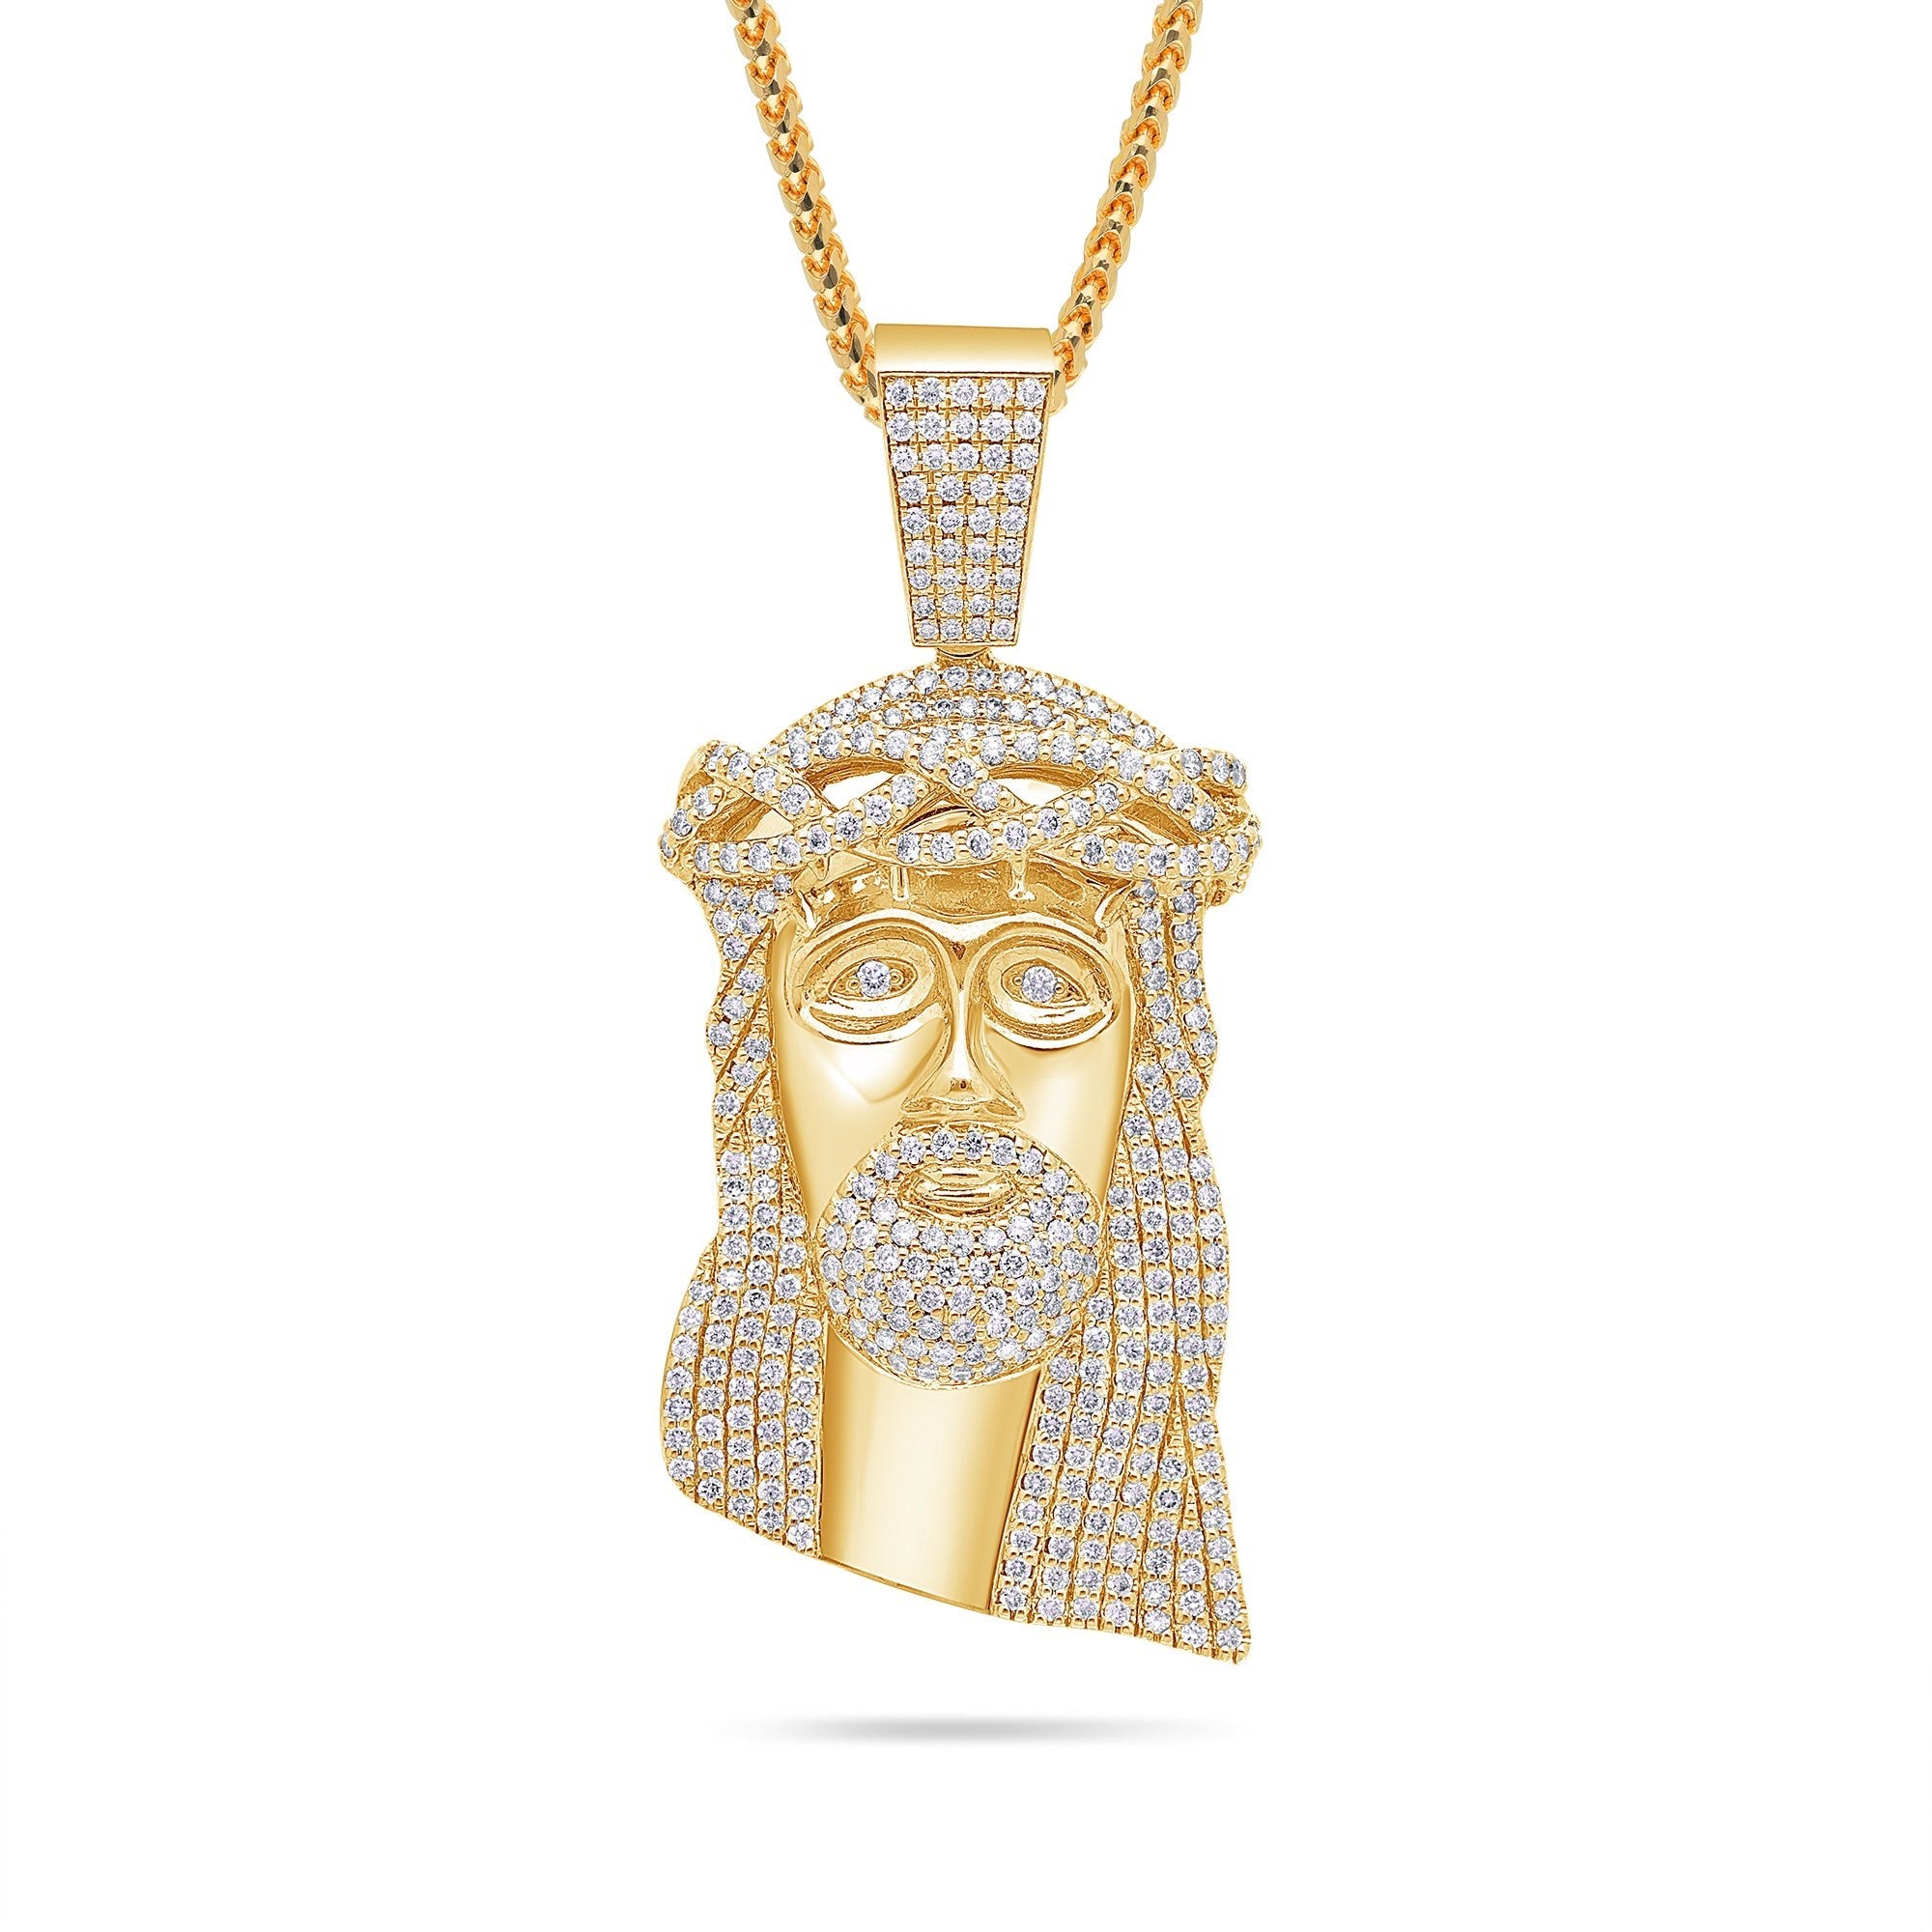 Mid-Sized Jesus Piece (Fully Iced) (14K YELLOW GOLD) - IF & Co. Custom Jewelers